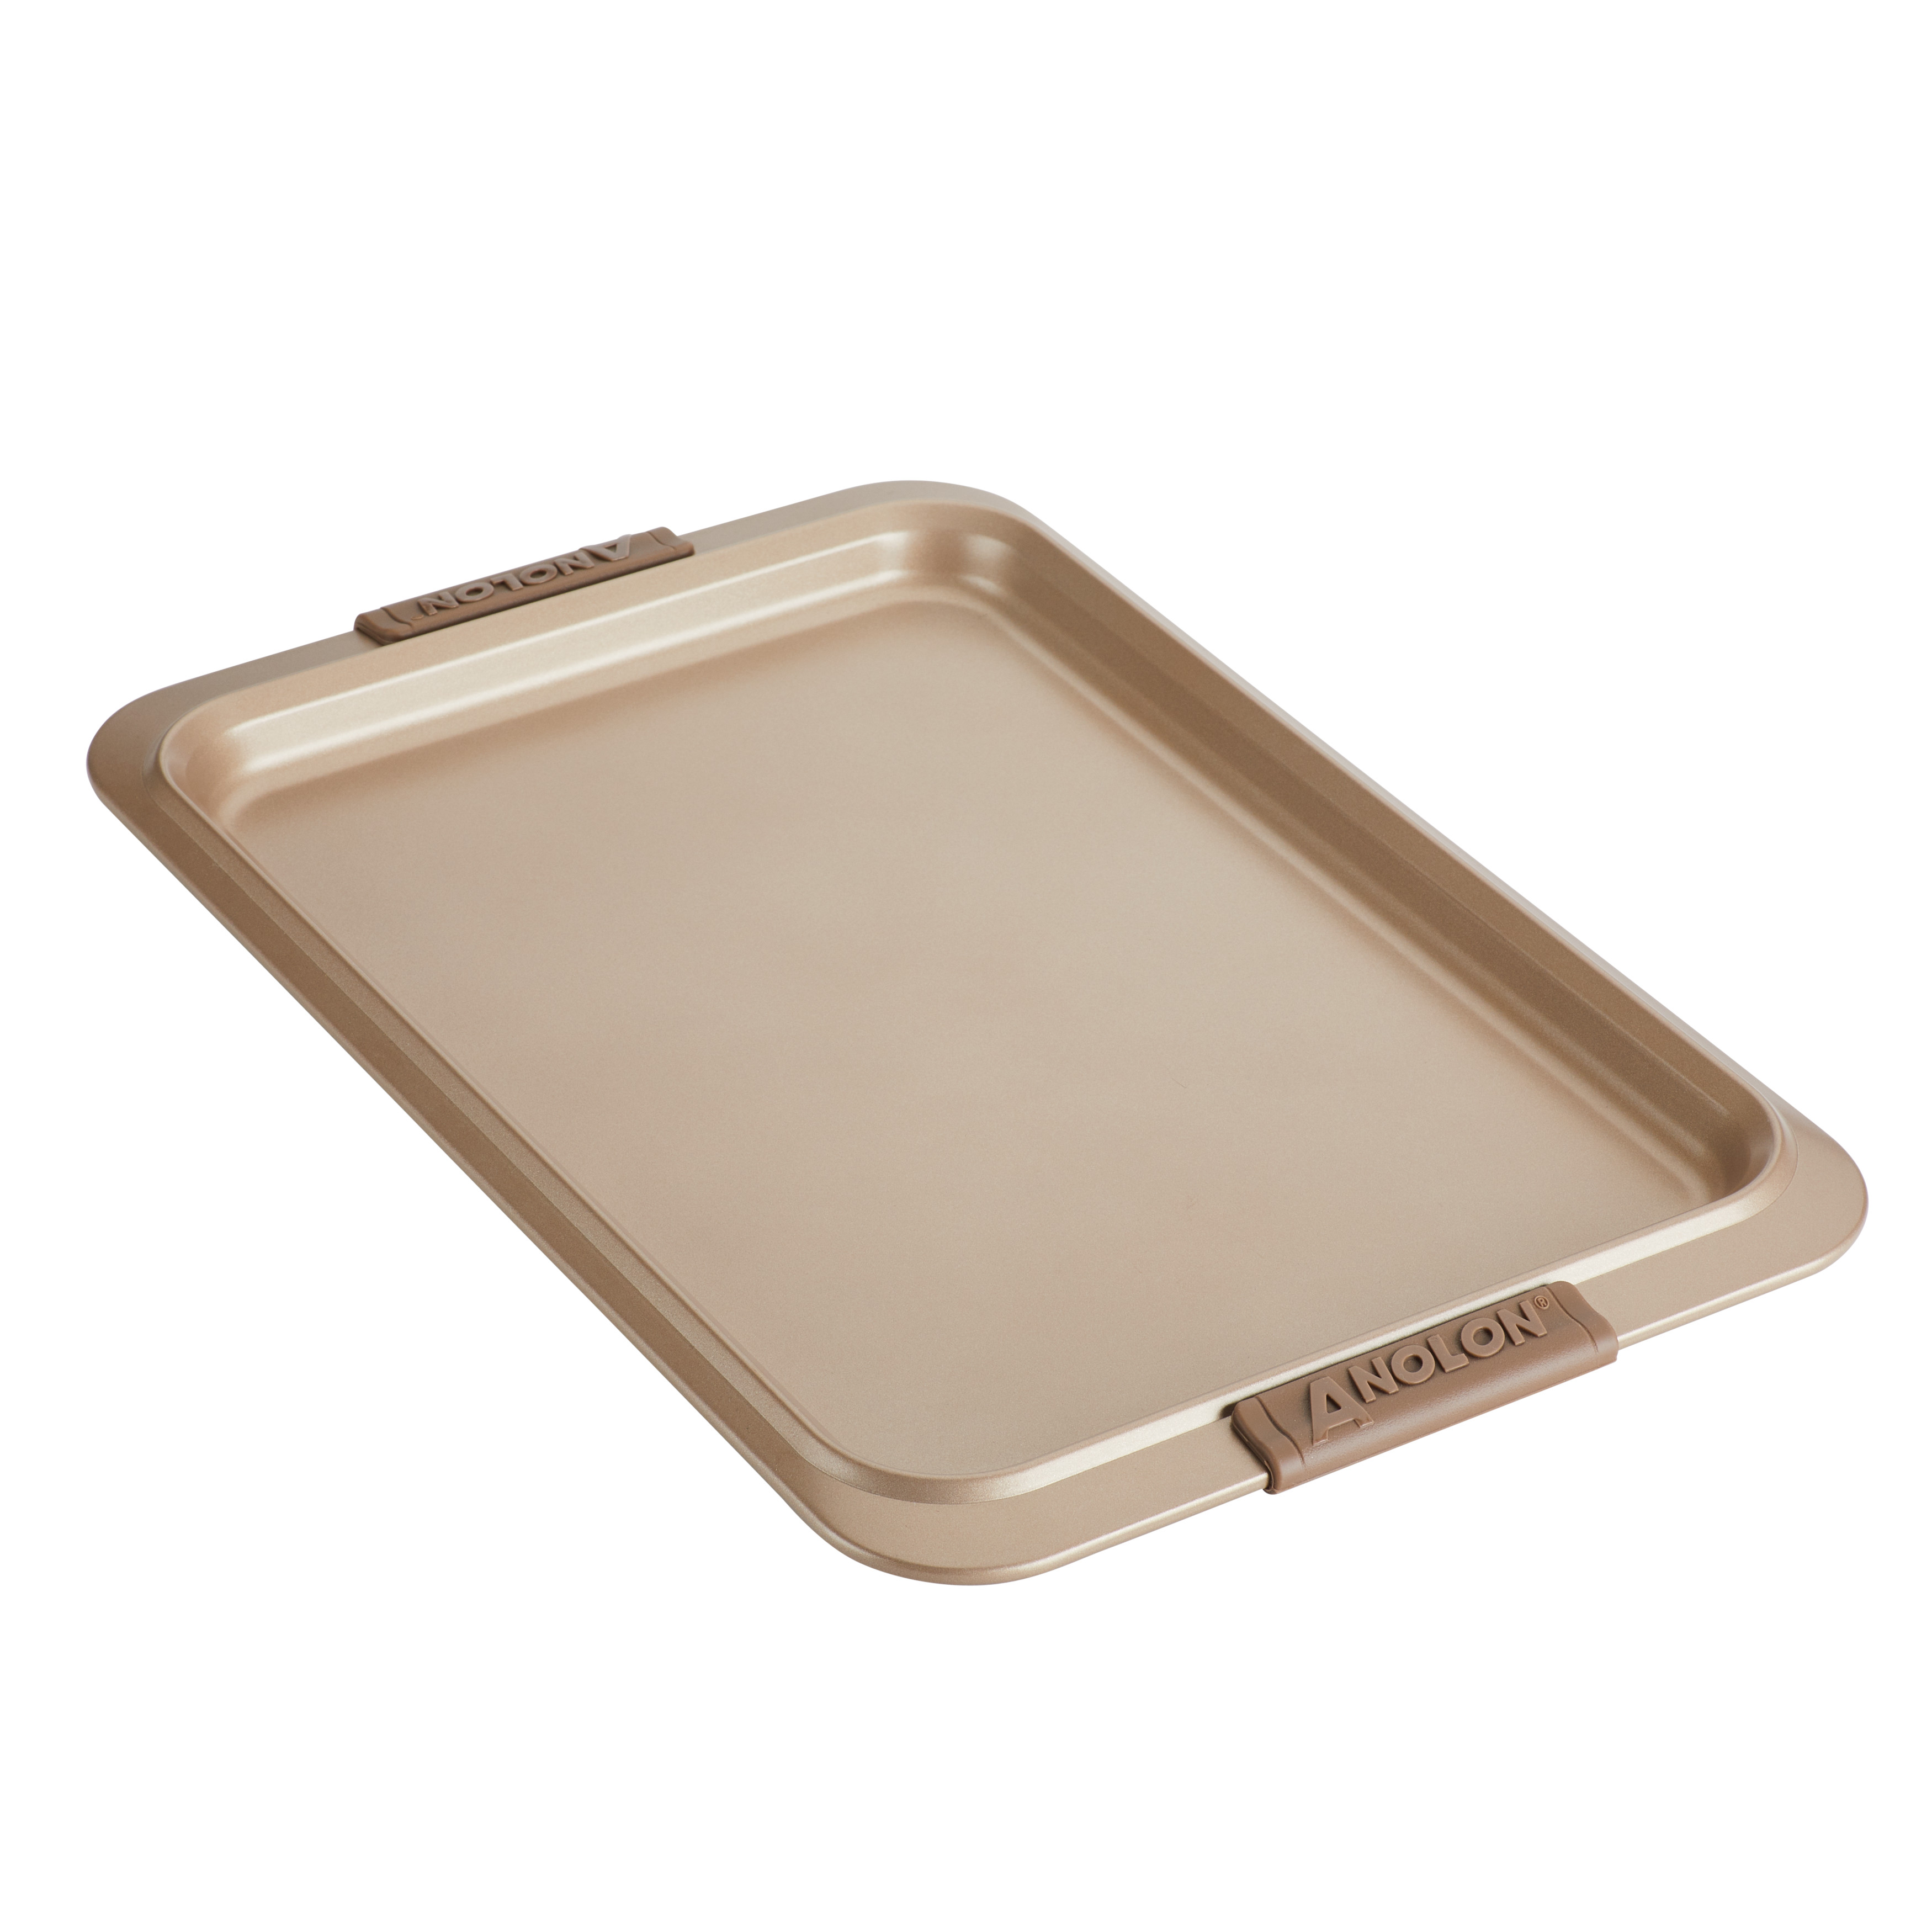 Anolon Advanced Bronze Nonstick Bakeware 10-Inch x 15-Inch Cookie Pan with  Silicone Grips